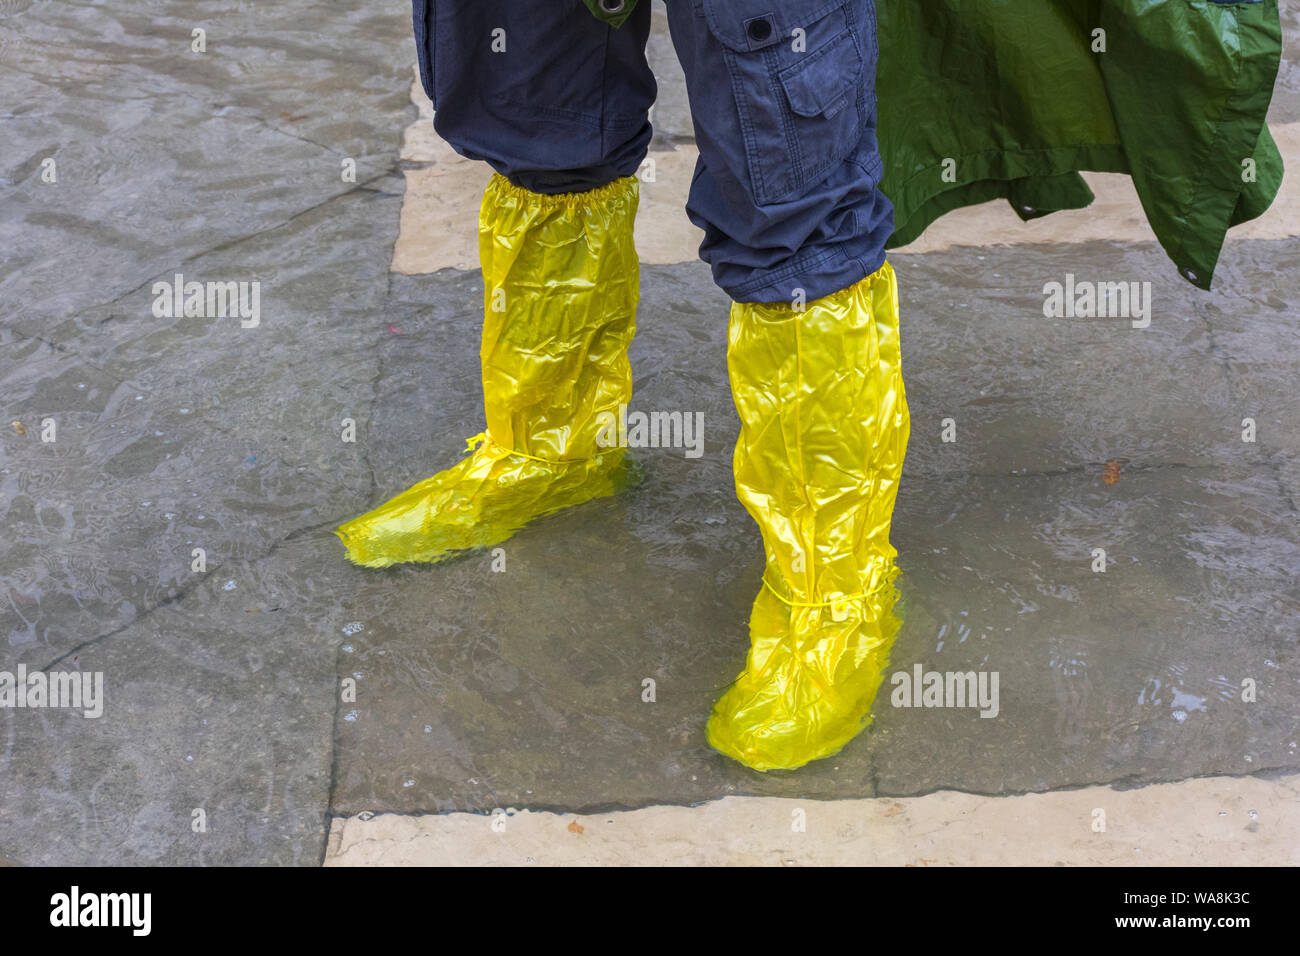 A man wearing Goldon stivali waterproof overshoes during an Acqua alta (high water) event, Saint Mark's Square, Venice, Italy Stock Photo